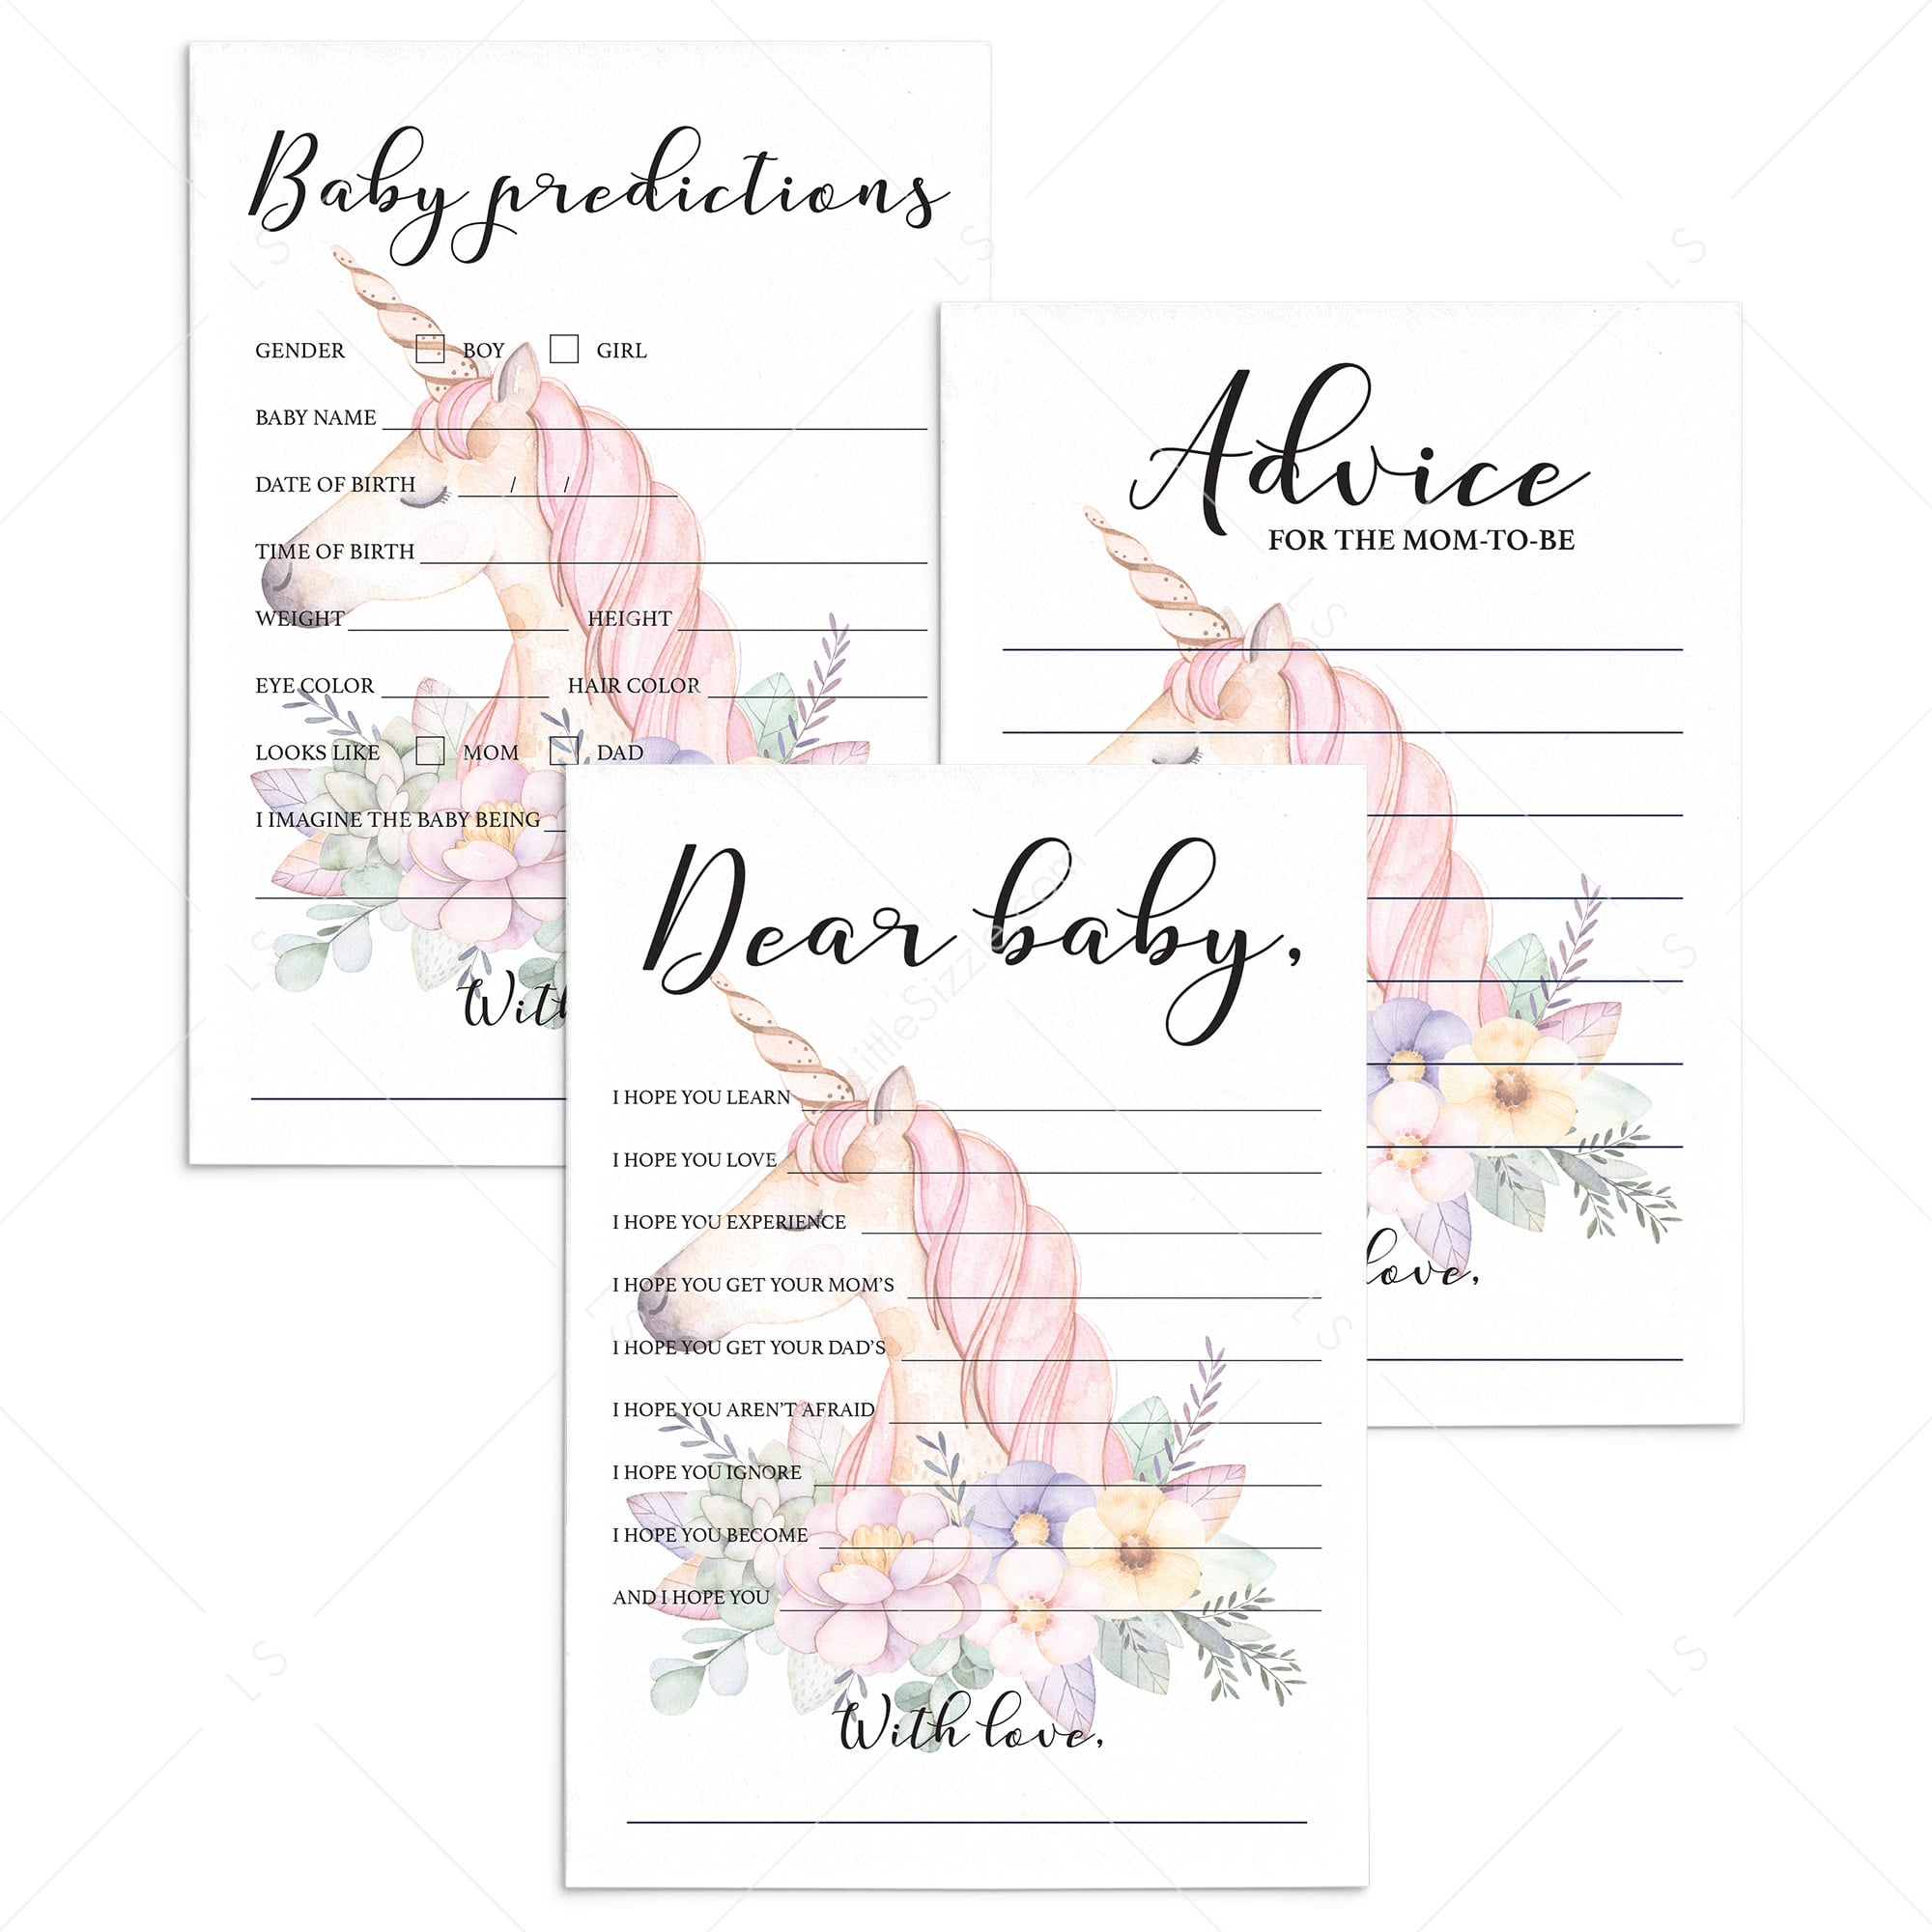 Unicorn baby shower games for girls by LittleSizzle